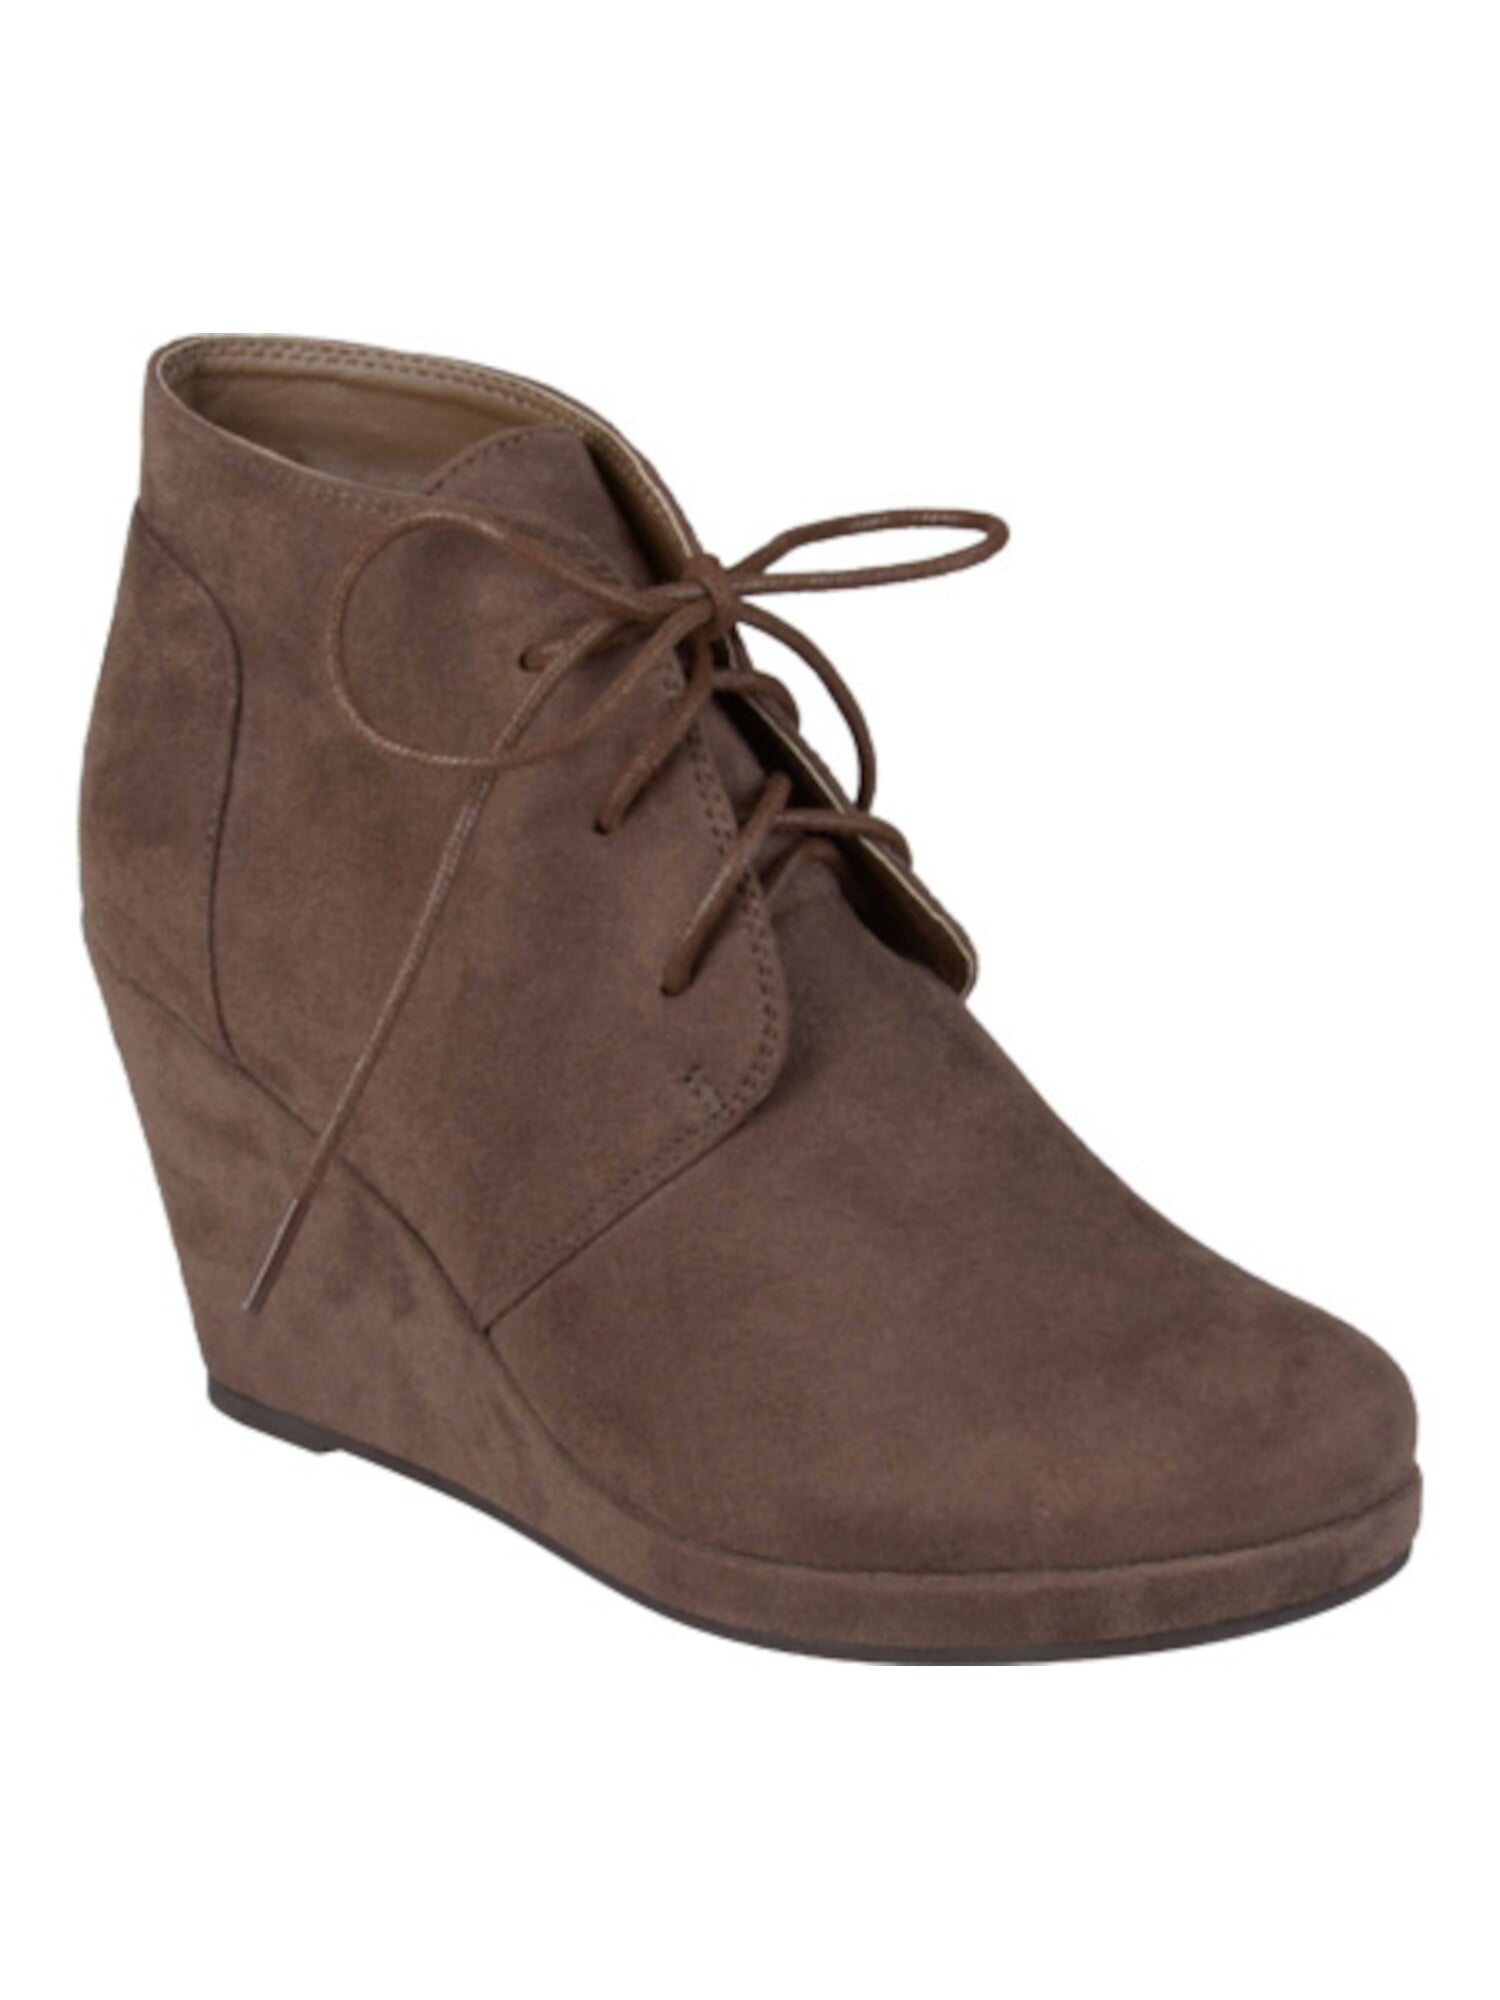 Enter Women Round Toe Synthetic Brown Ankle Boot - Walmart.com